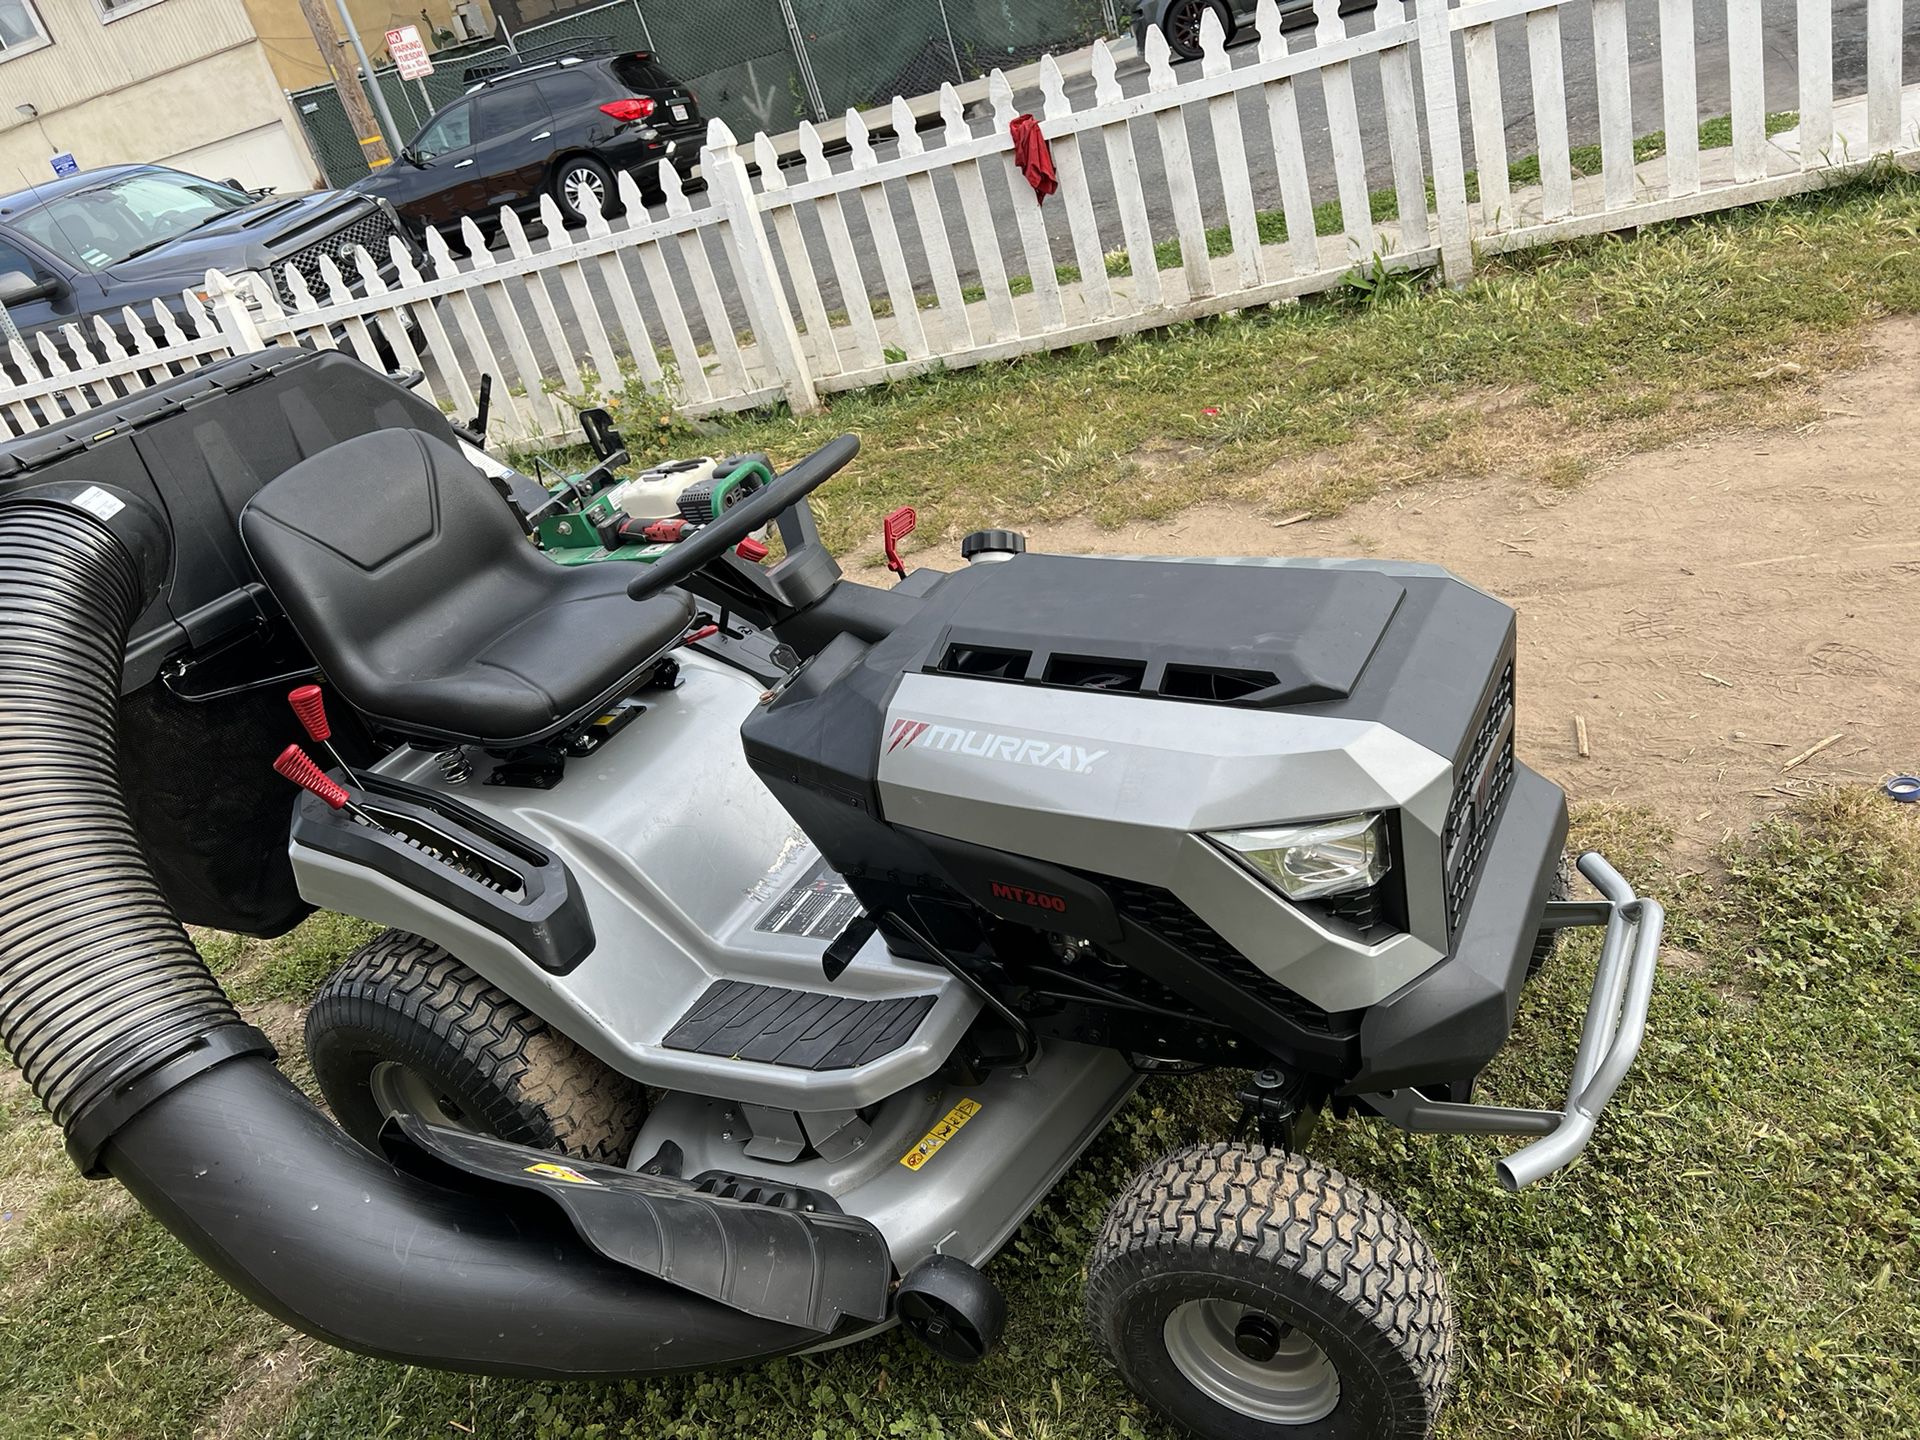 Murray MT200 42 in. 19.0 HP 540cc EX1900 Series Briggs and Stratton Engine  Automatic Gas Riding Lawn Tractor Mower for Sale in Gardena, CA - OfferUp